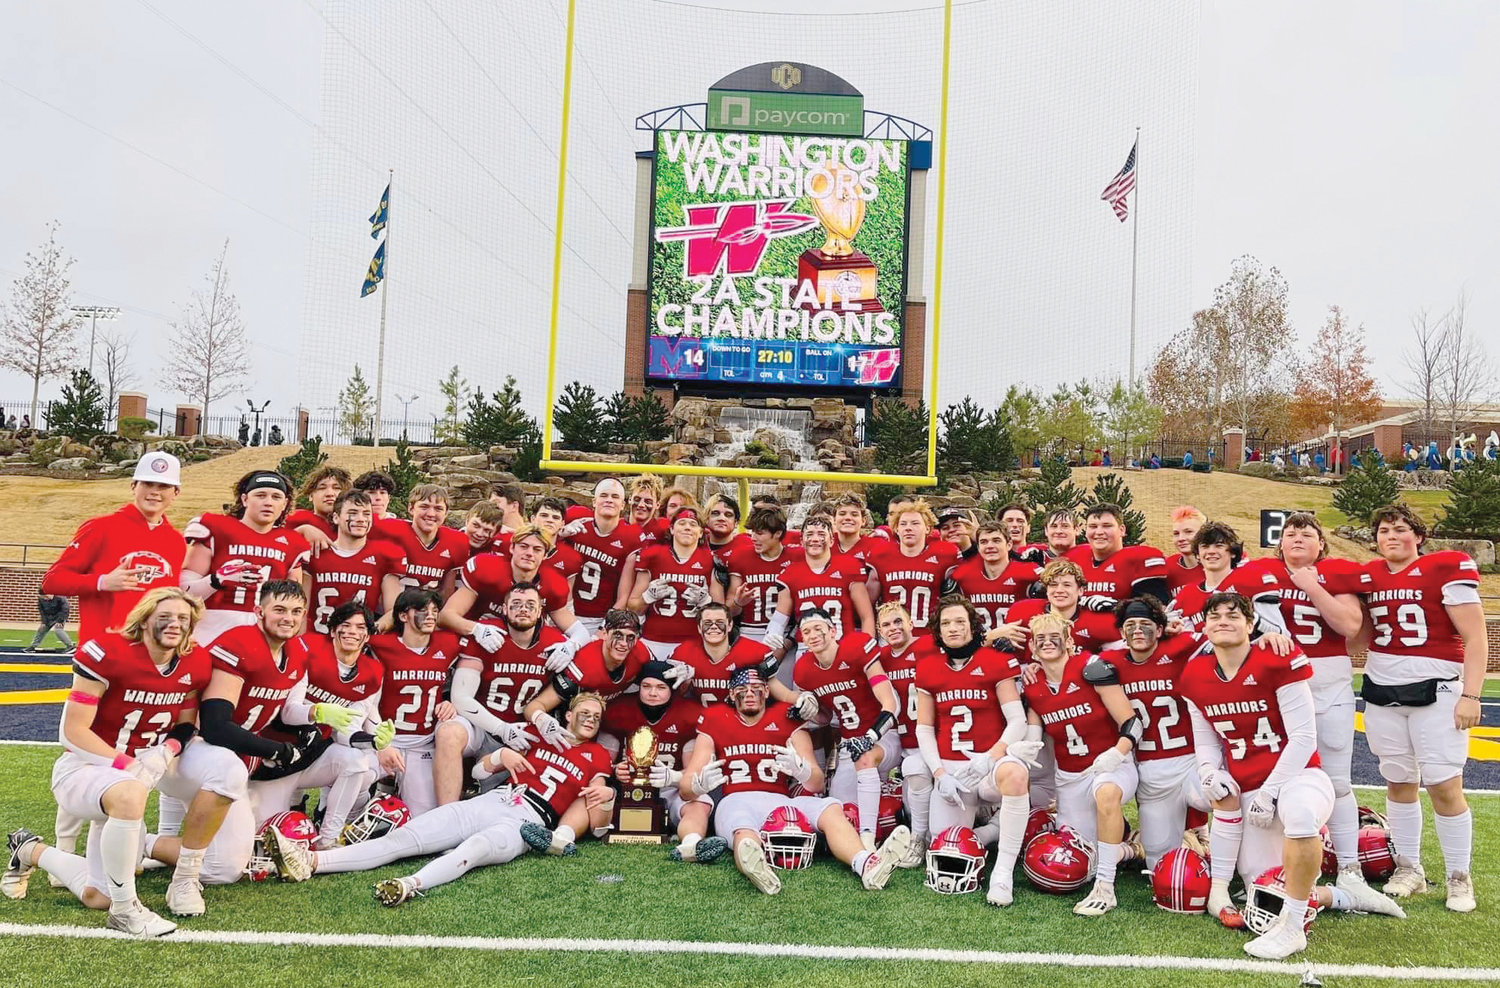 The 2022 Washington Warriors finished off a perfect 15-0 season with a 17-14 victory Saturday over Millwood at Chad Richison Stadium in Edmond on the campus of the University of Central Oklahoma.